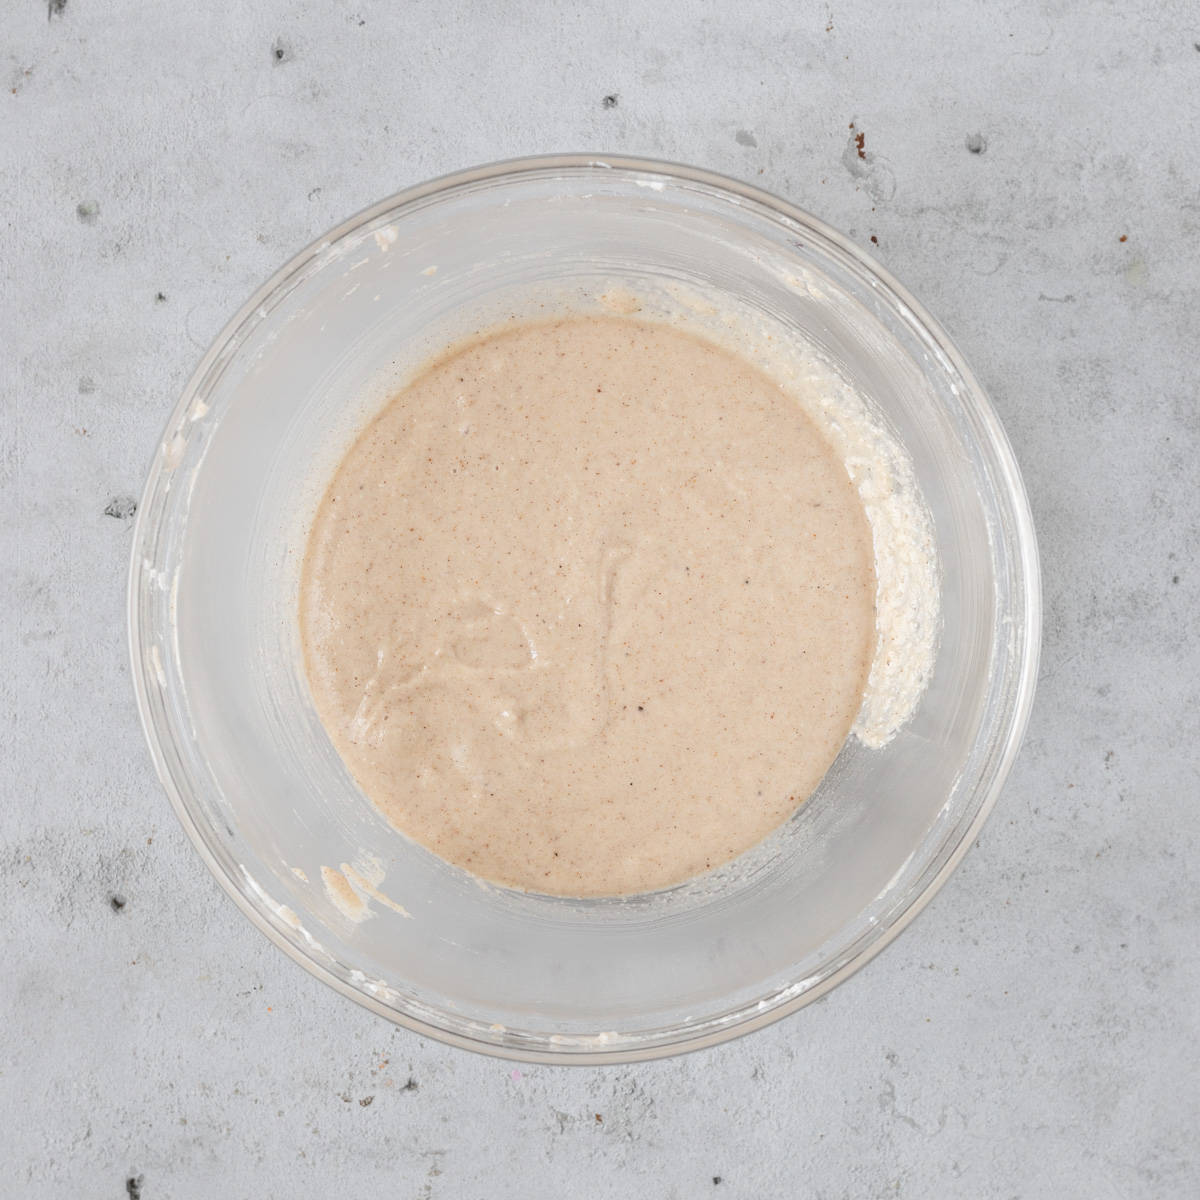 the macaron batter in a glass bowl on a grey background.